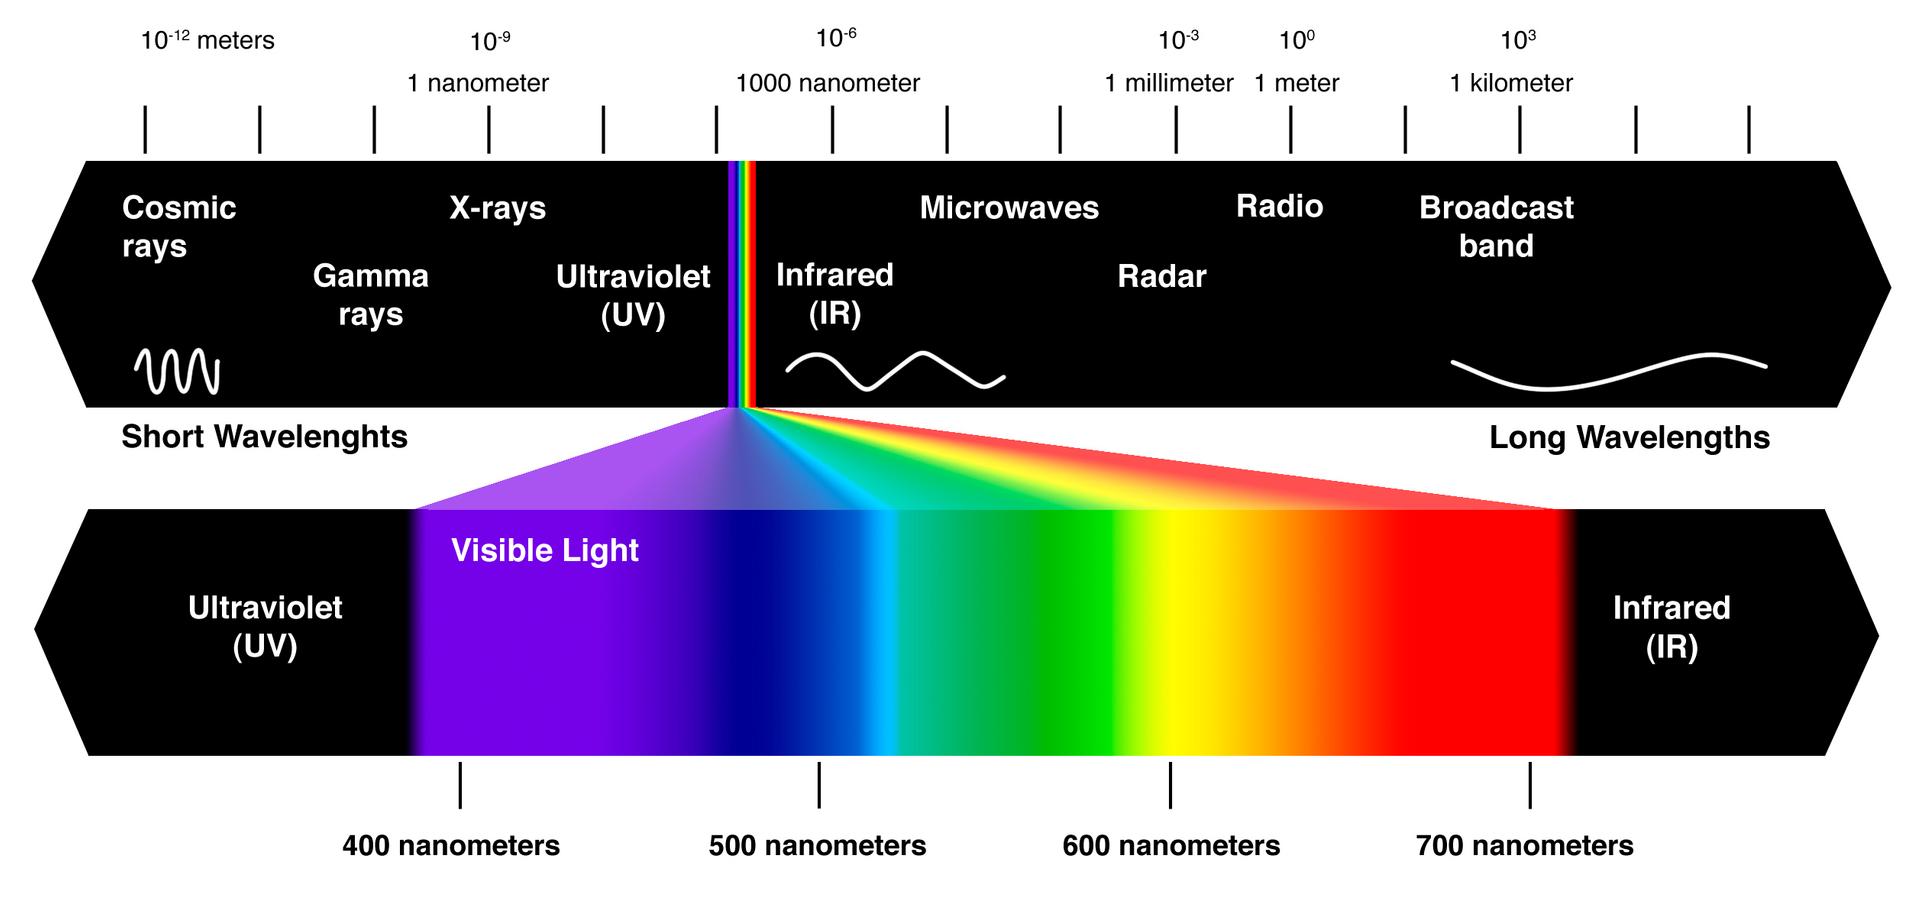 Visible light is just a fraction of the entire electromagnetic spectrum. While it may be hard to believe, things like radiowaves, microwaves, and even the light we see, are all the same- just with different frequencies.